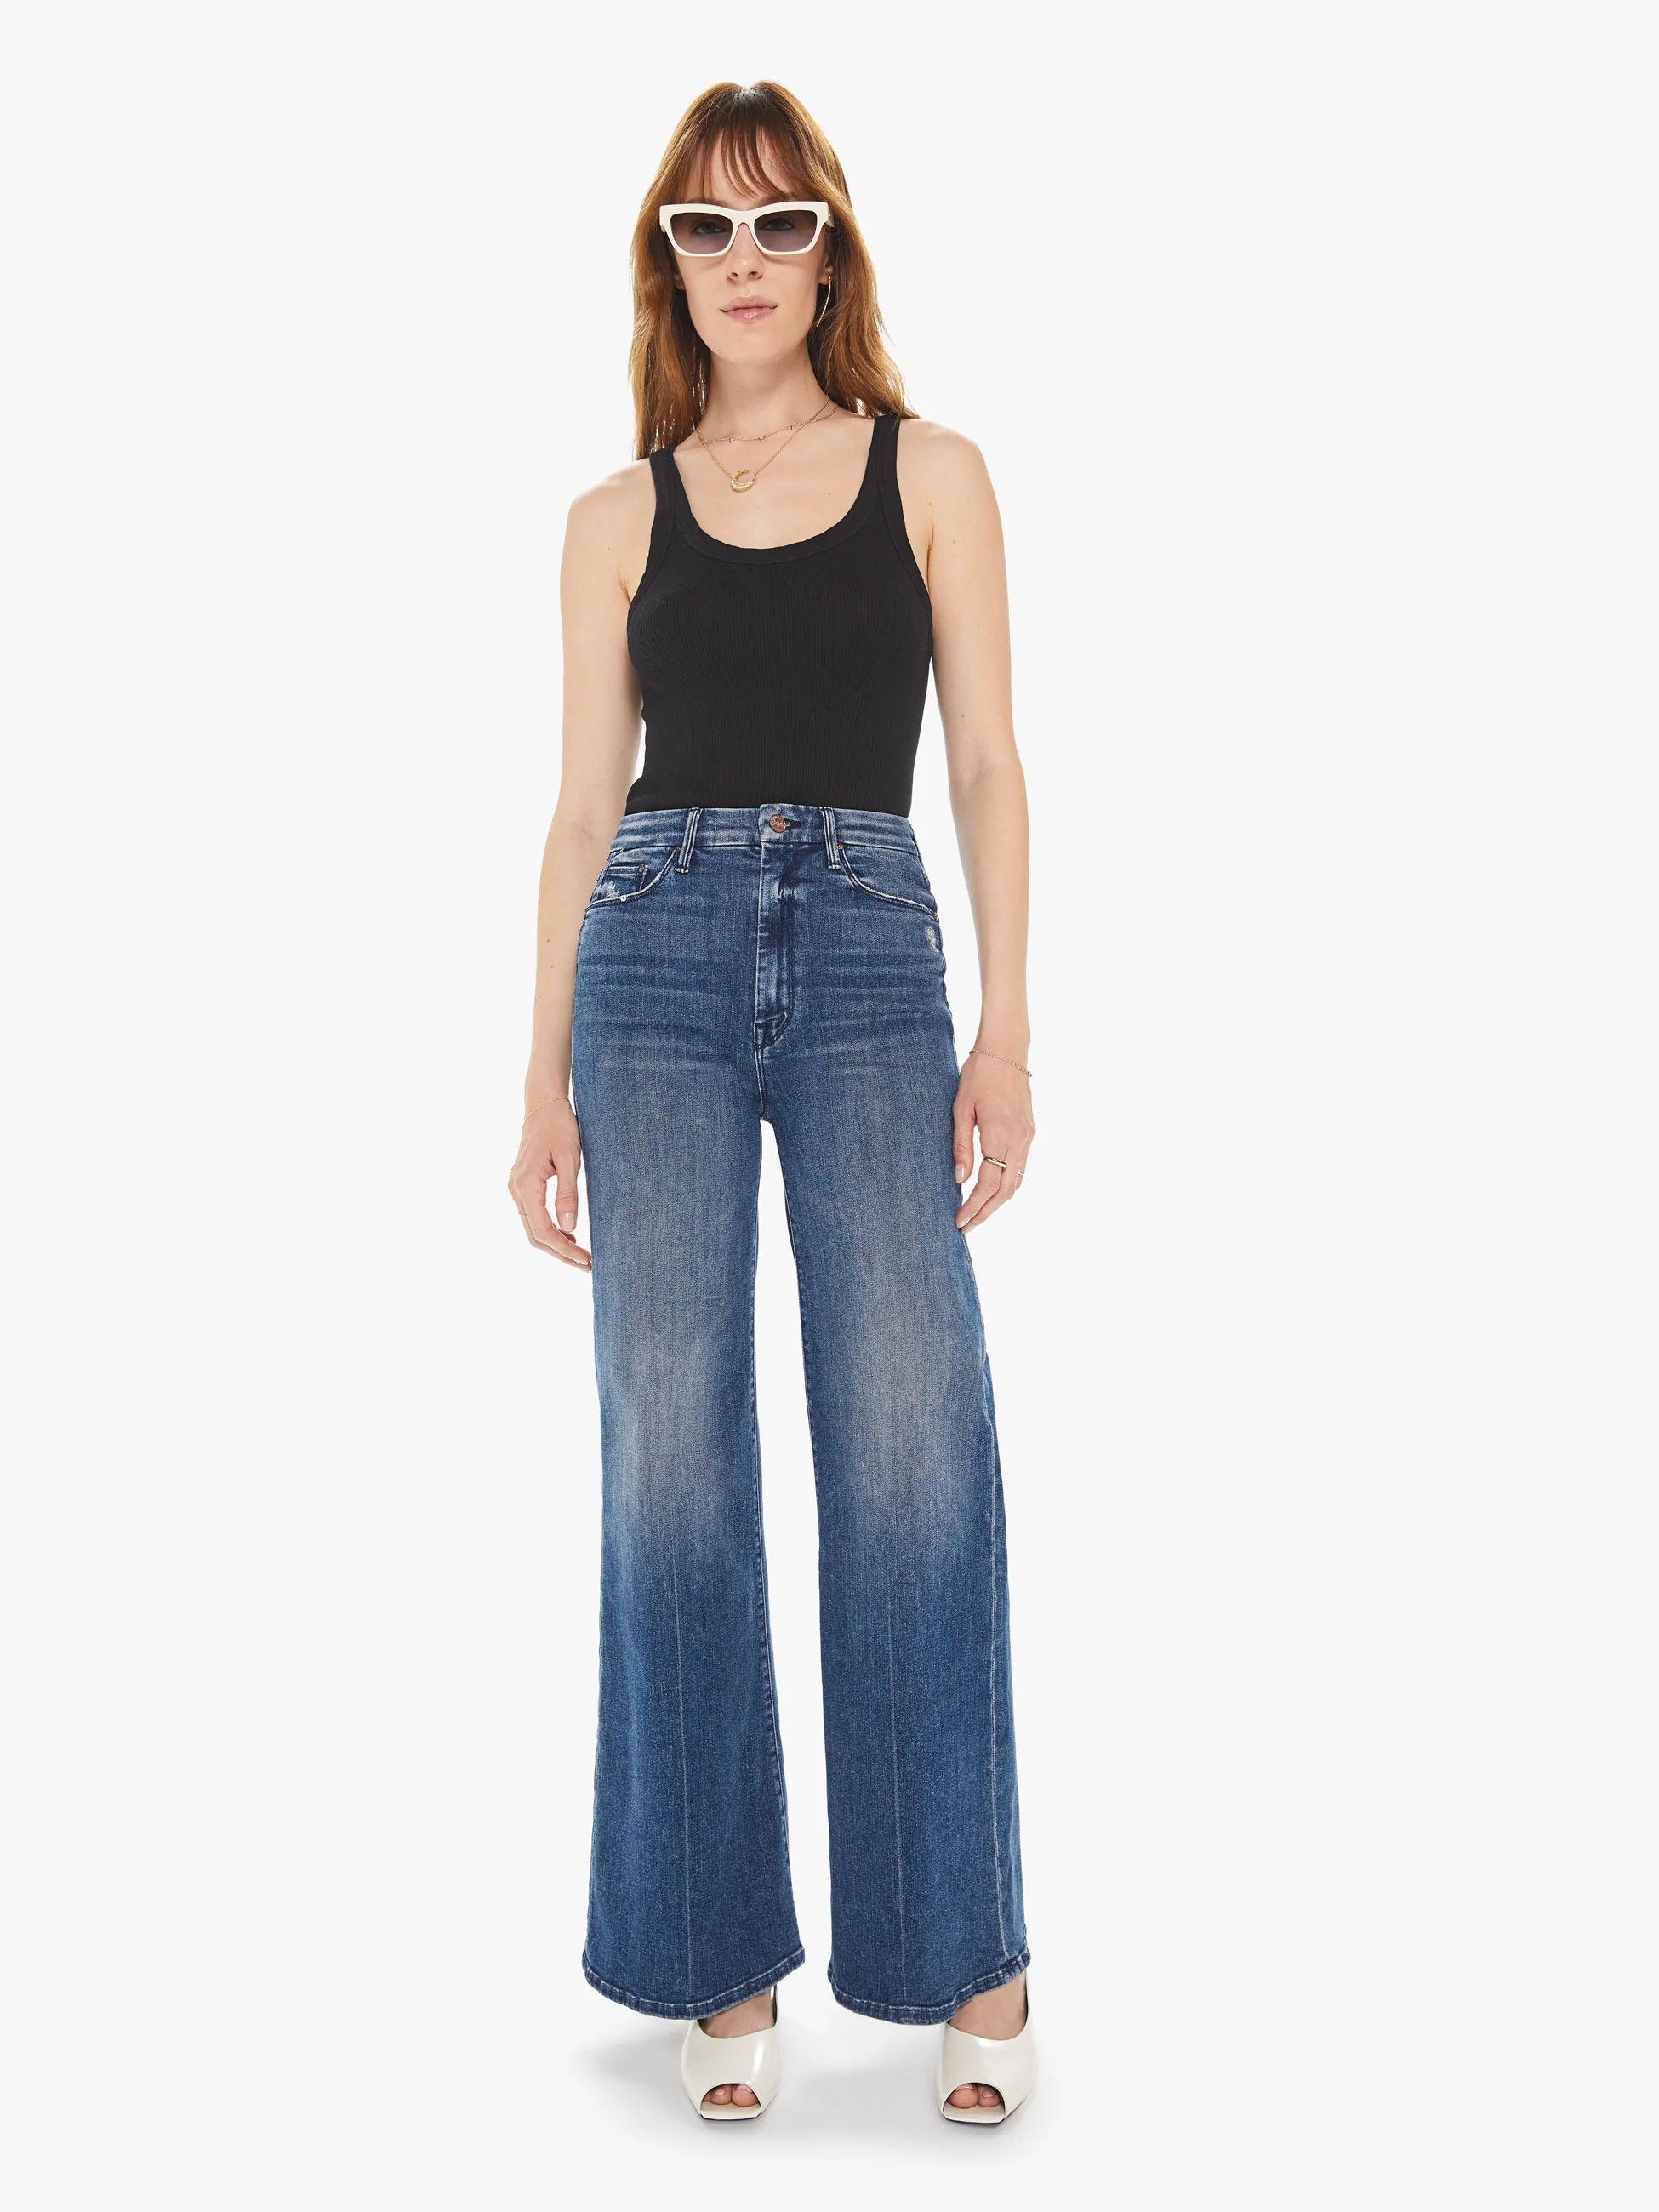 HIGH WAISTED ROLLER SKIMP - OUT FOR THE EVENING | Mother Denim